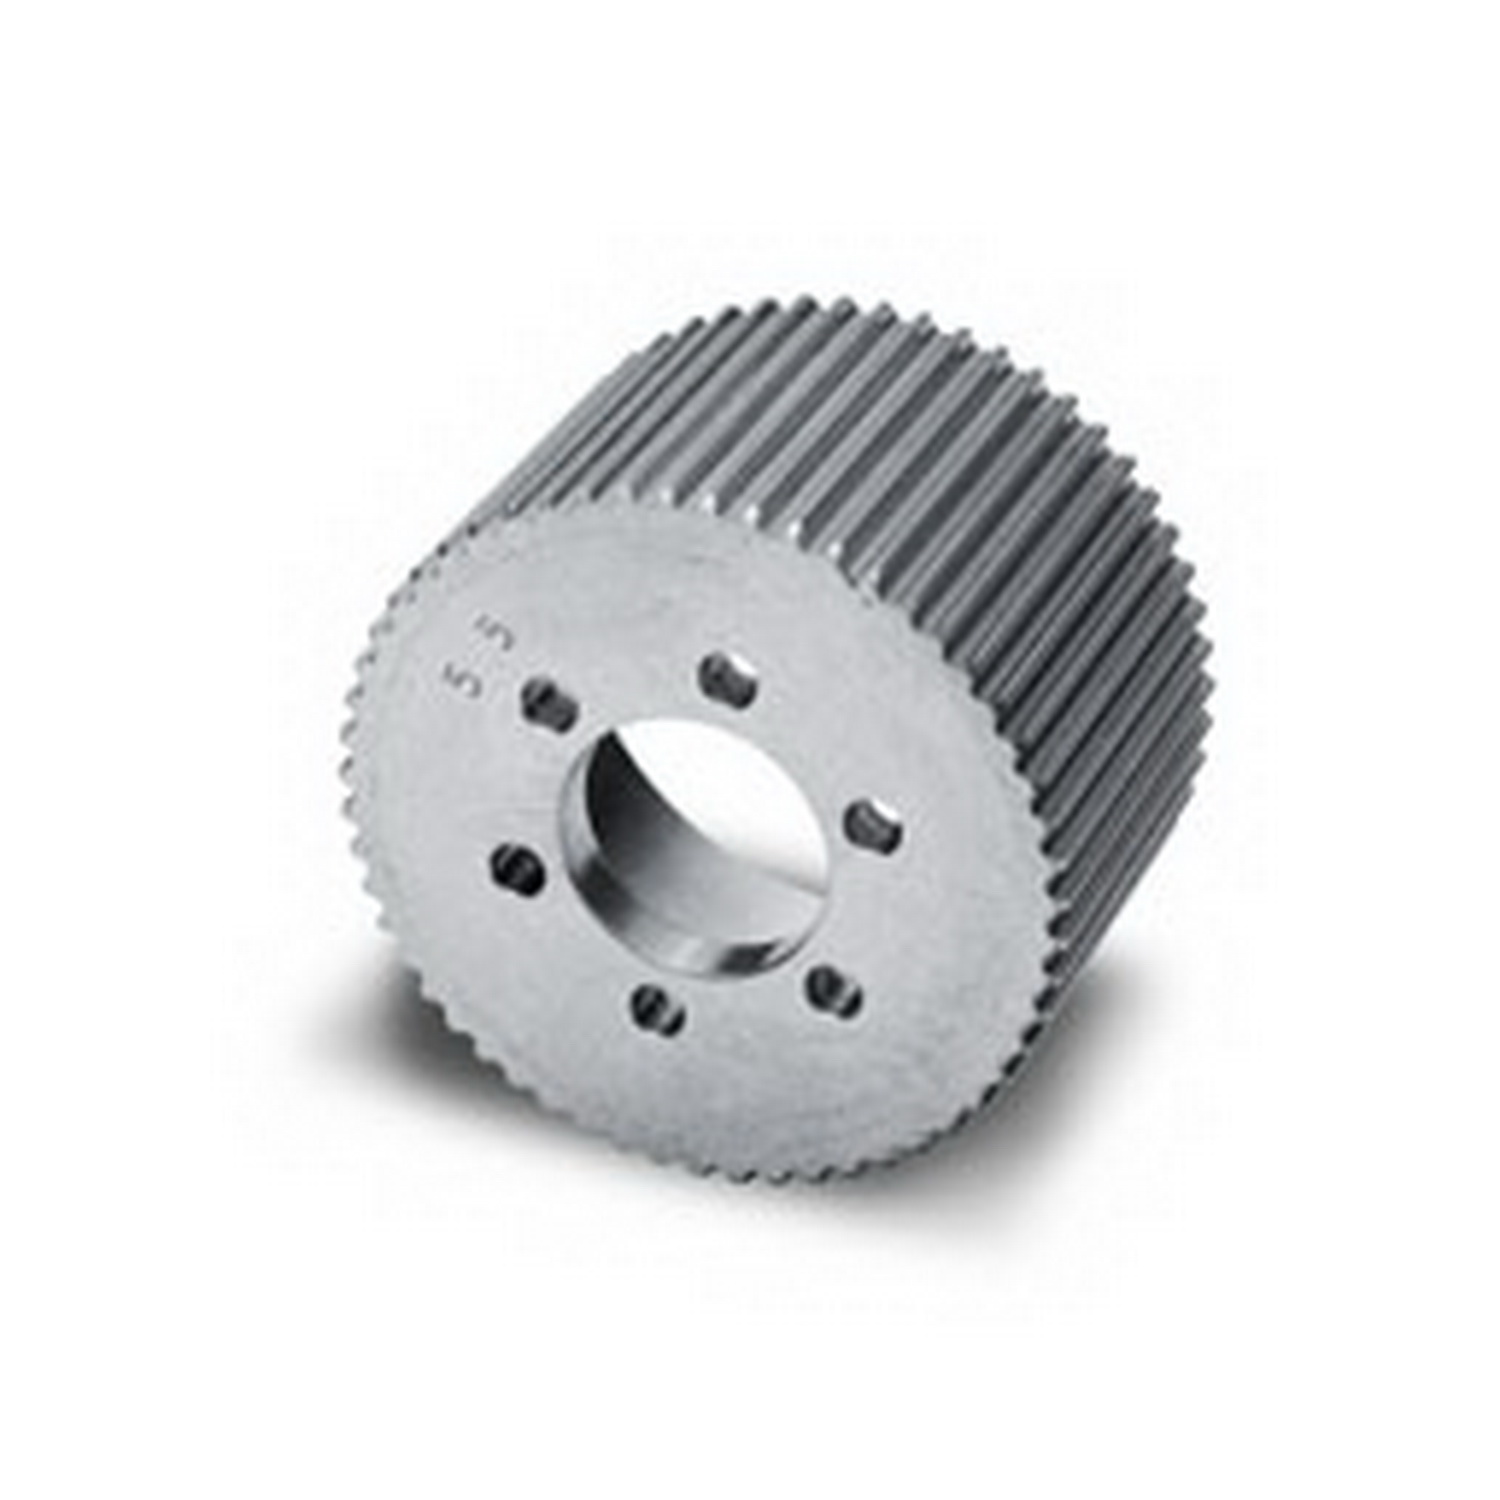 Weiand Weiand 7109-51 8mm Pitch Drive Pulley